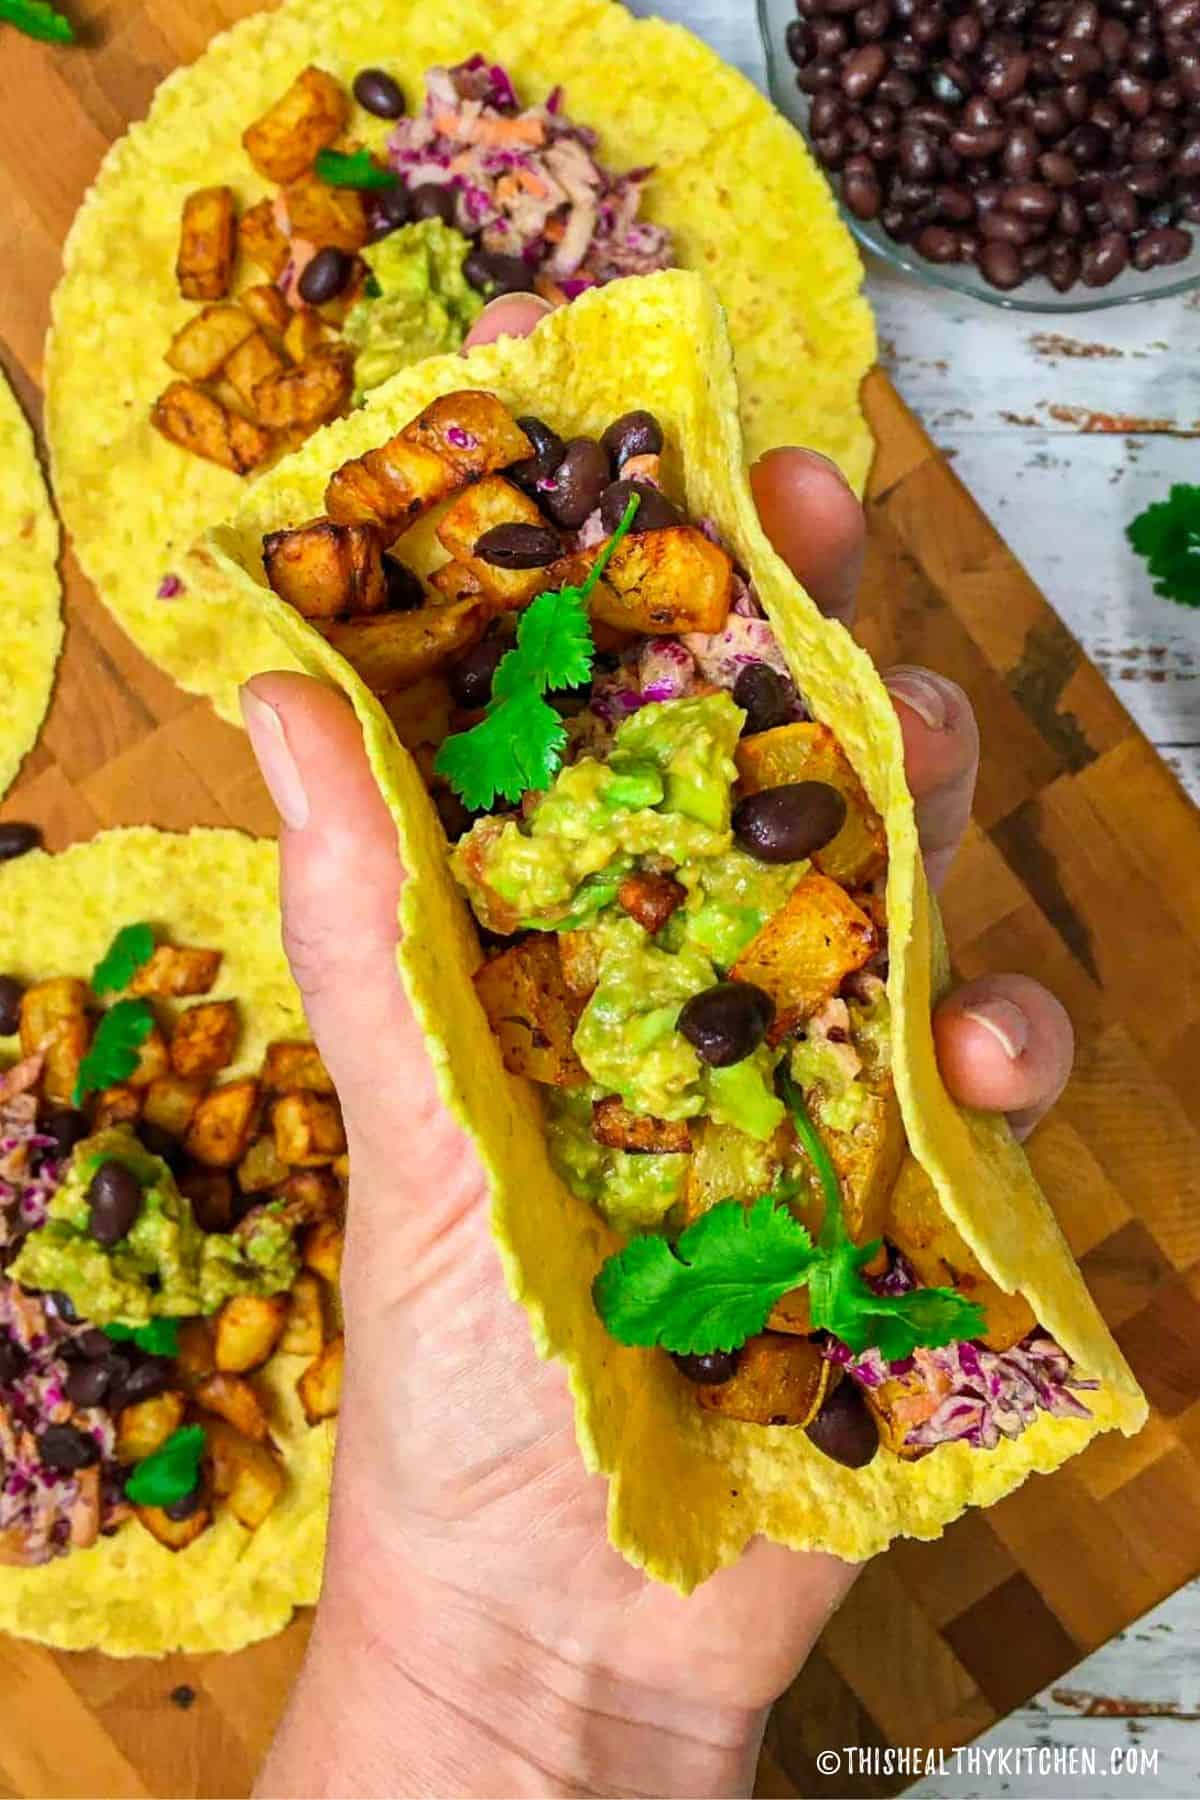 Corn tortillas stuffed with potatoes, black beans, guacamole and coleslaw.